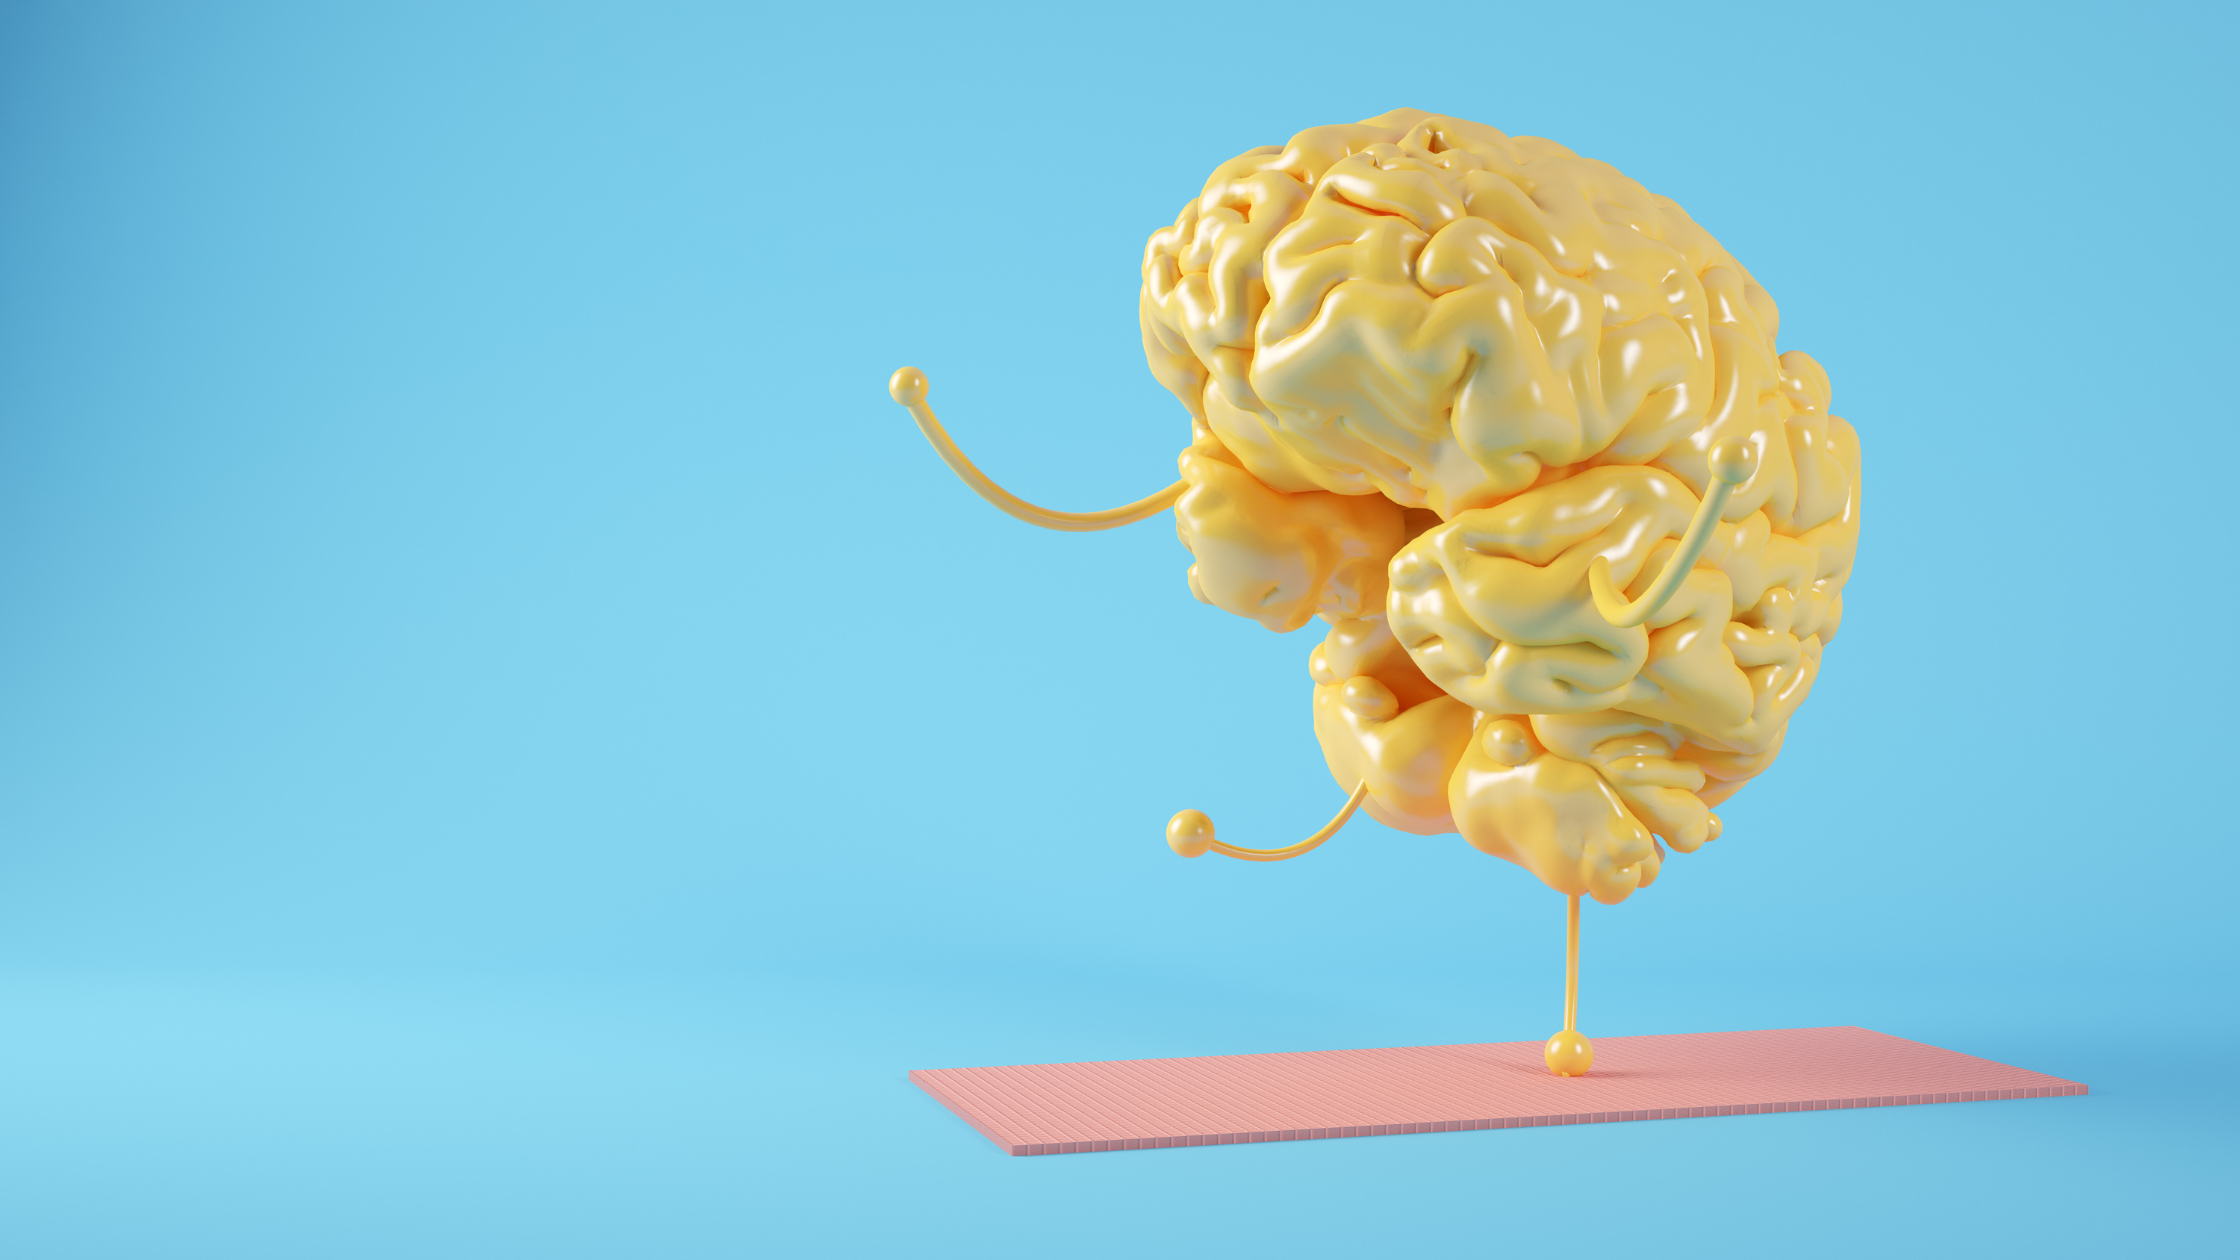 A blue background with an animated yellow brain standing on a pink yoga mat